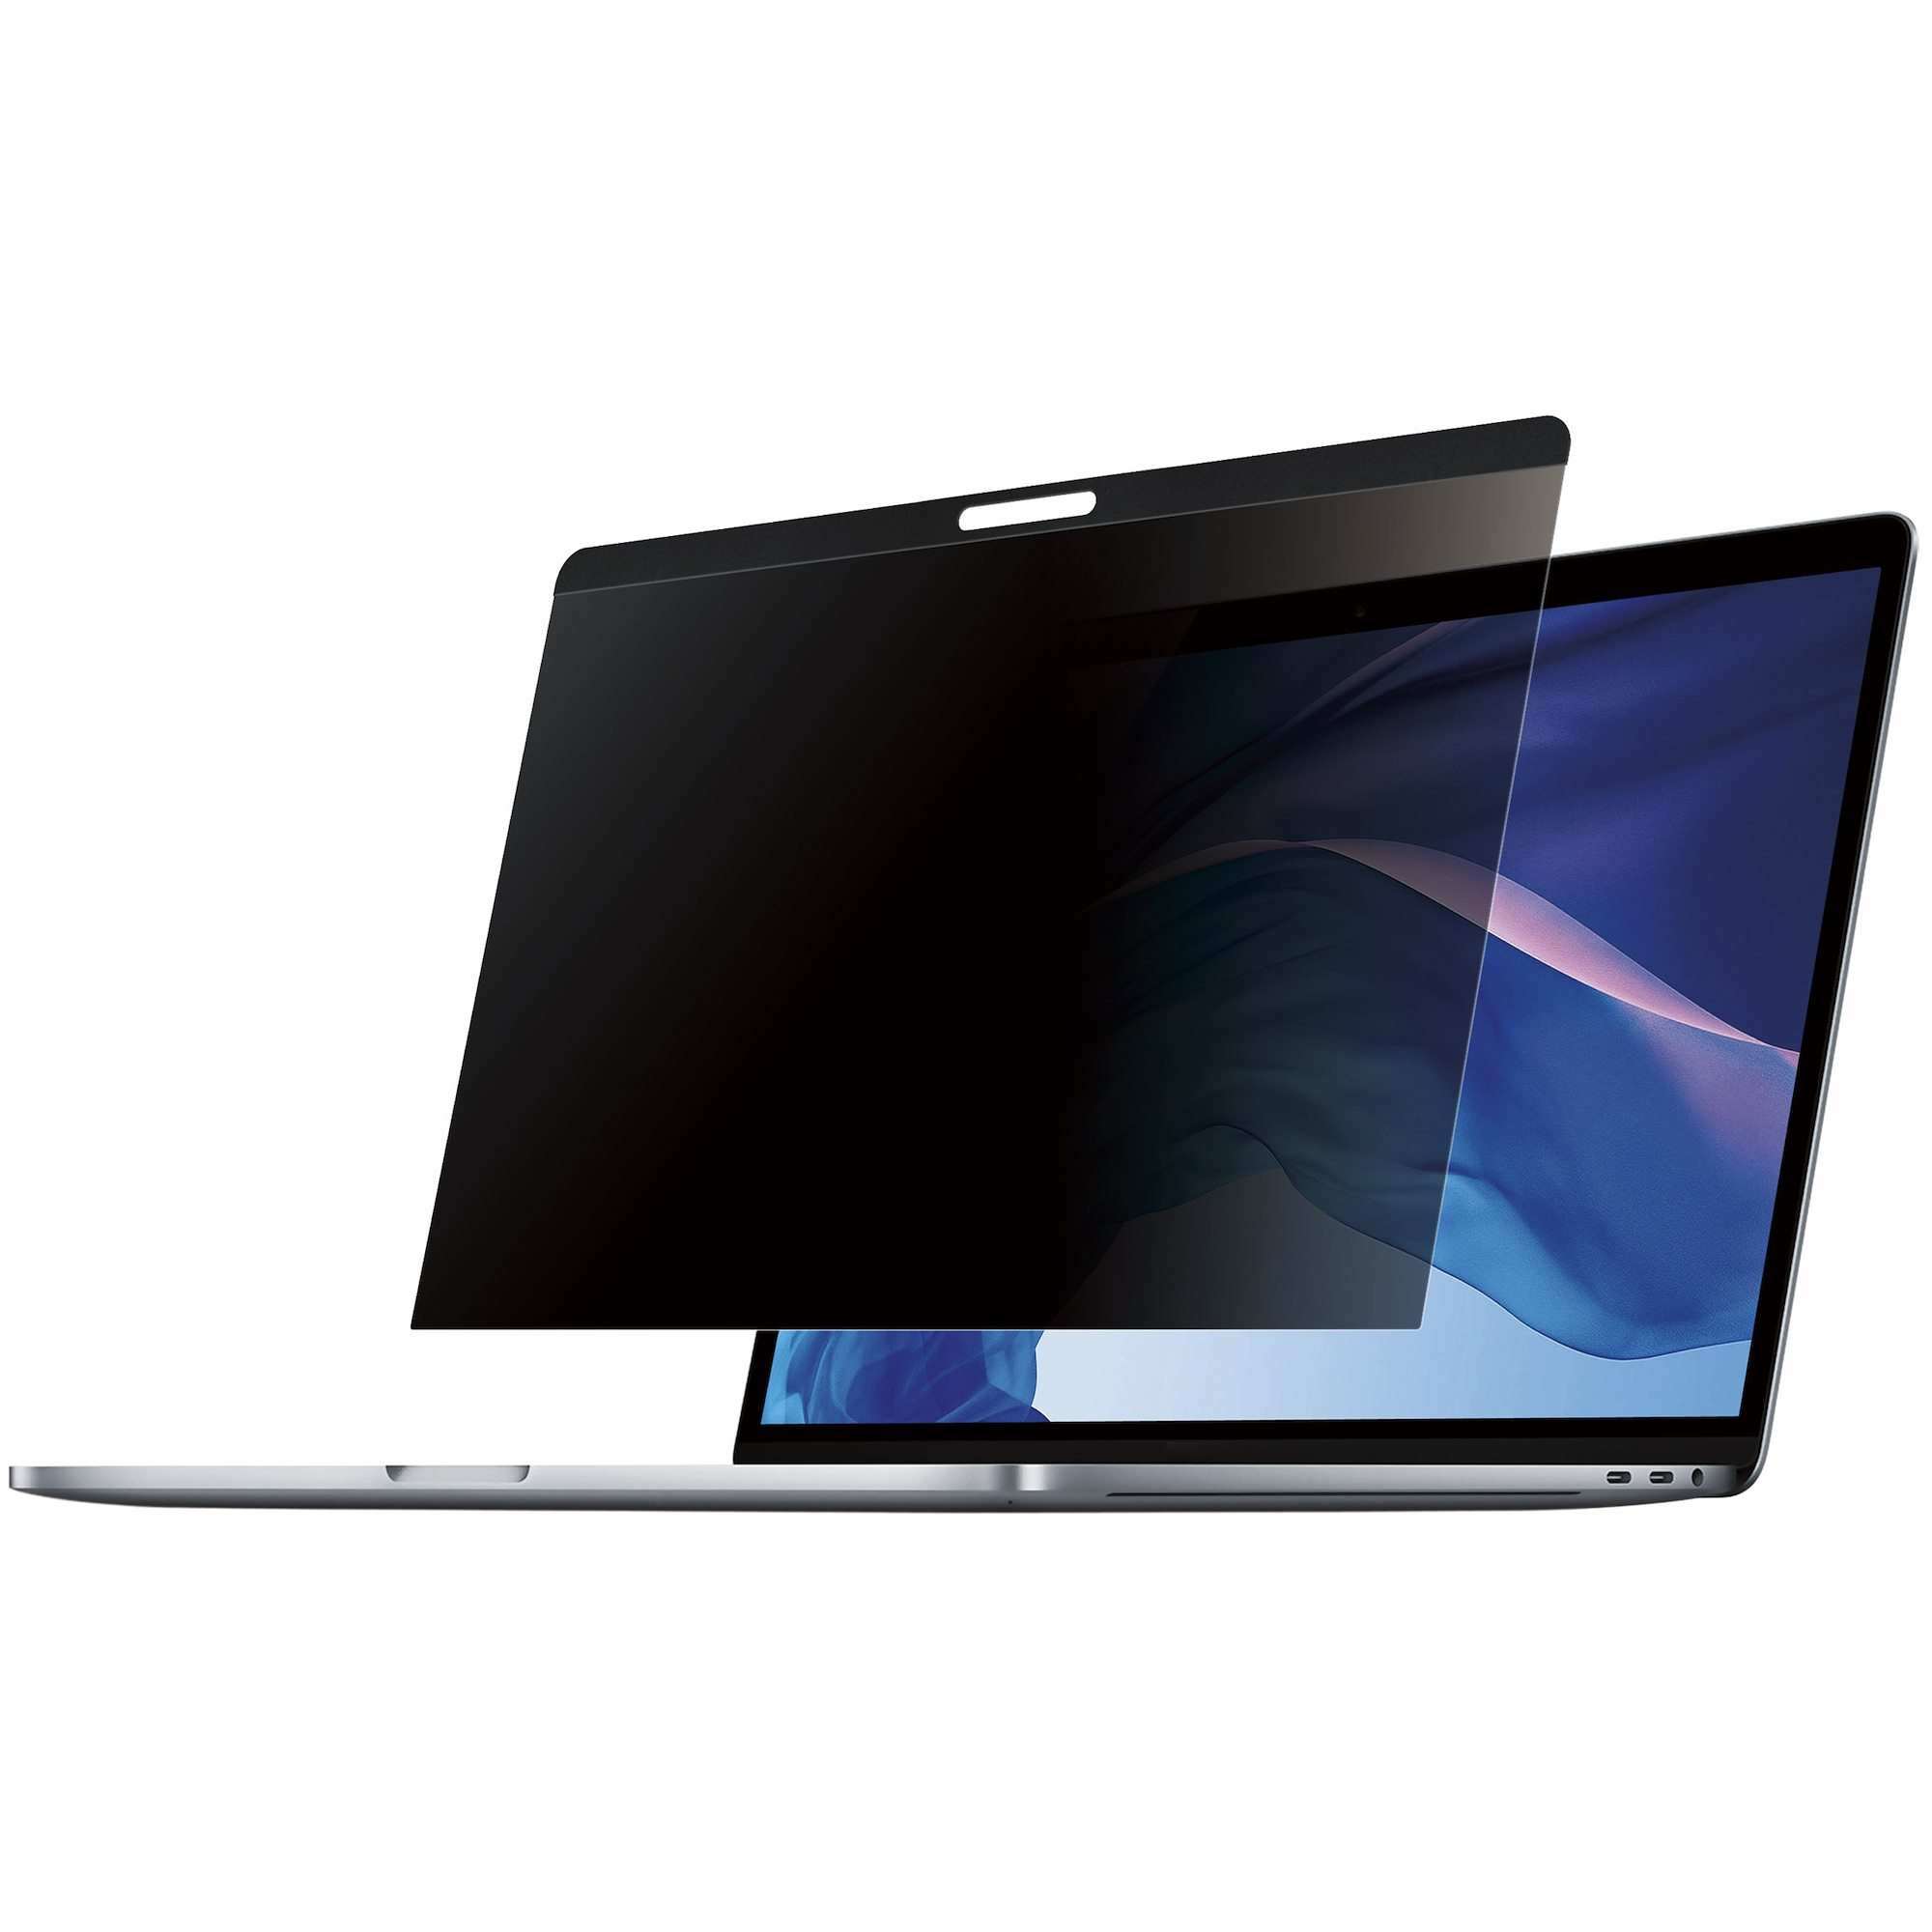 StarTech.com Laptop Privacy Screen for 15 inch MacBook Pro & MacBook Air - Magnetic Removable Security Filter - Blue Light Reducing Screen Protector 16:10 - Matte/Glossy - +/-30 Degree